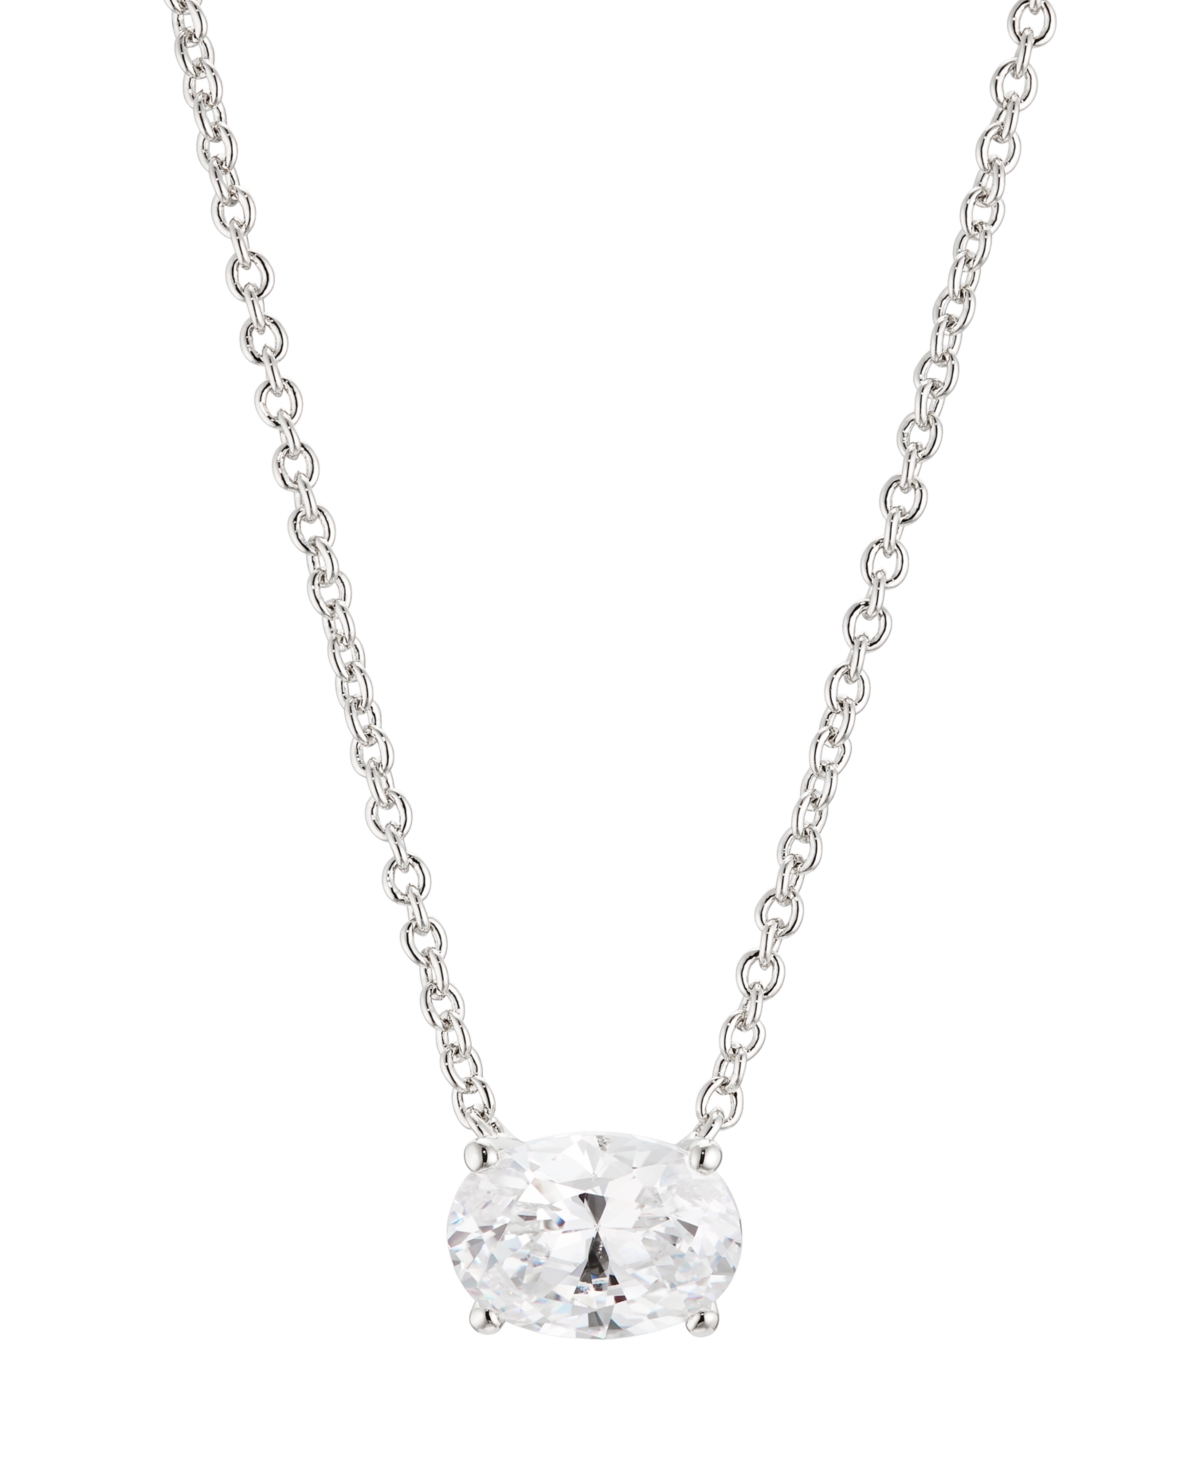 Oval Cubic Zirconia Necklace, 16" + 2" extender, Created for Macy's - Rhodium